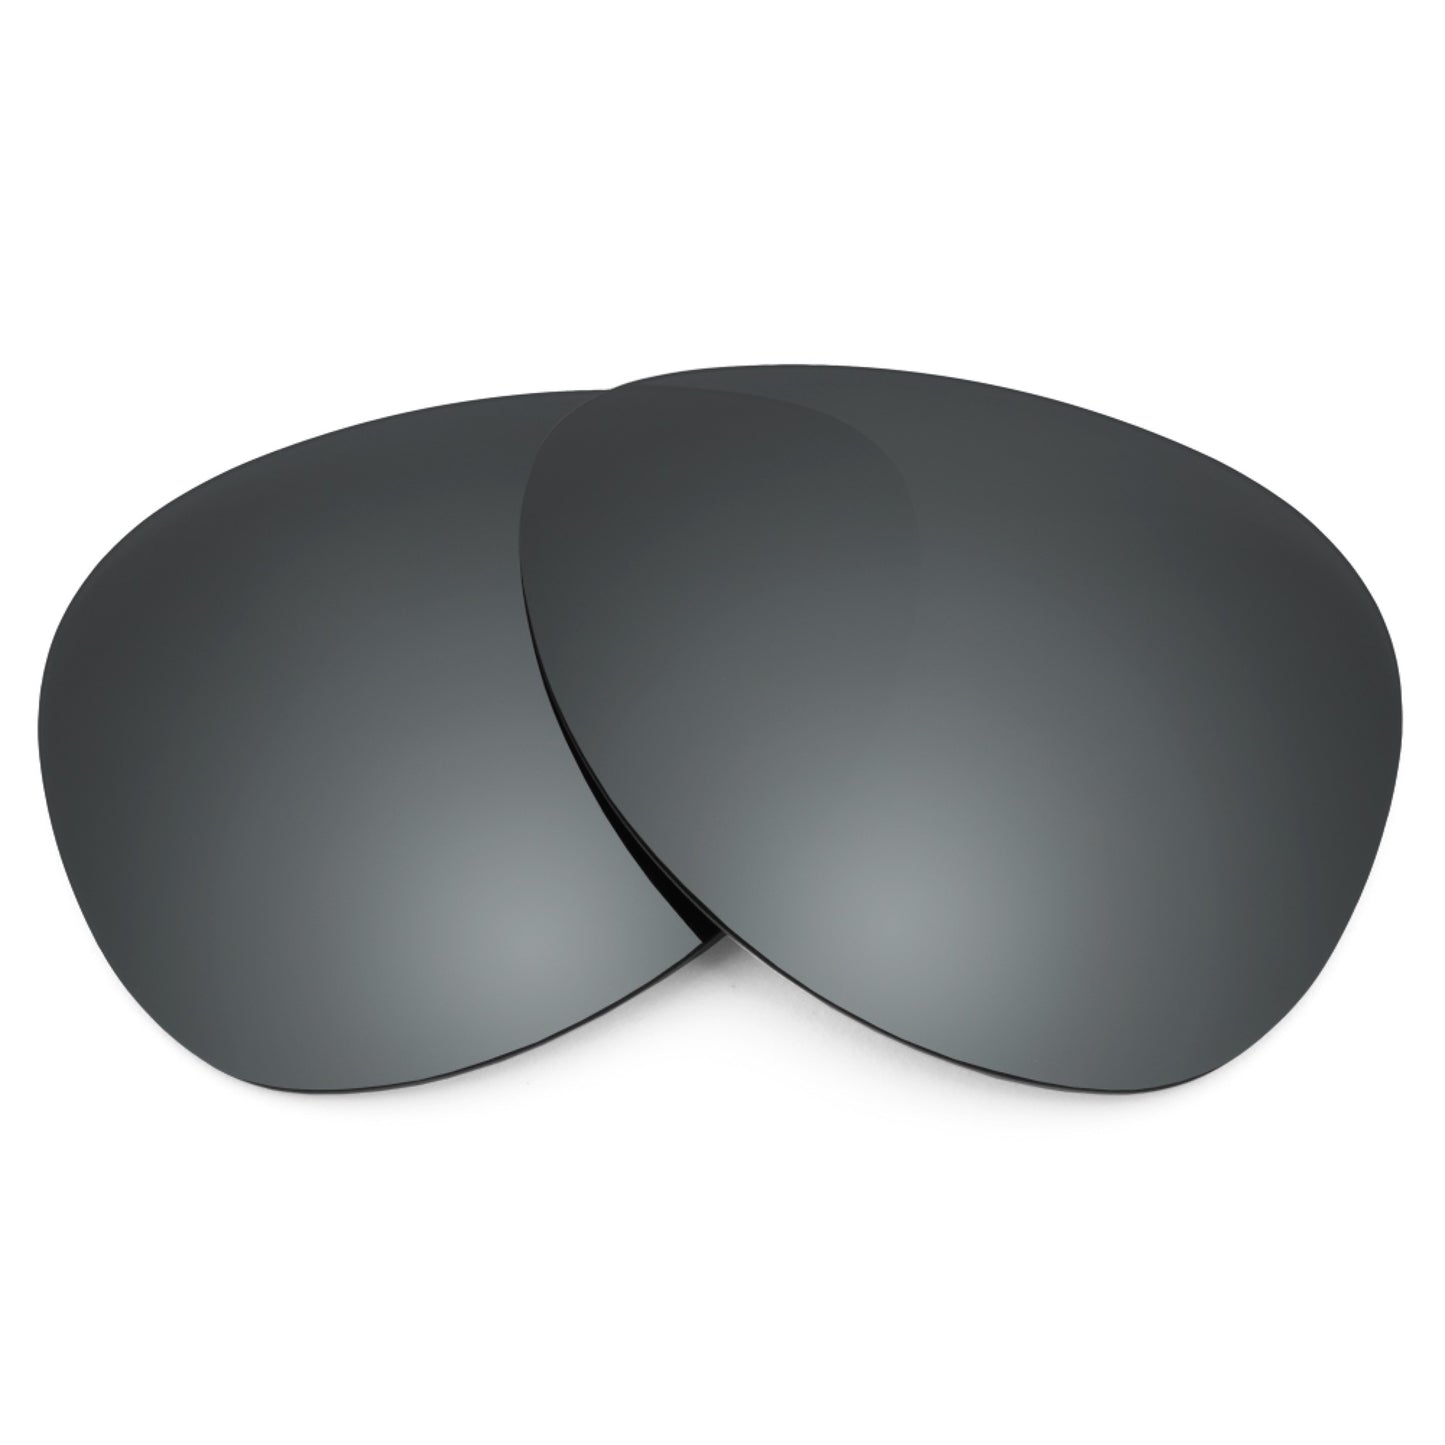 Revant replacement lenses for Ray-Ban RB4147 56mm Non-Polarized Black Chrome